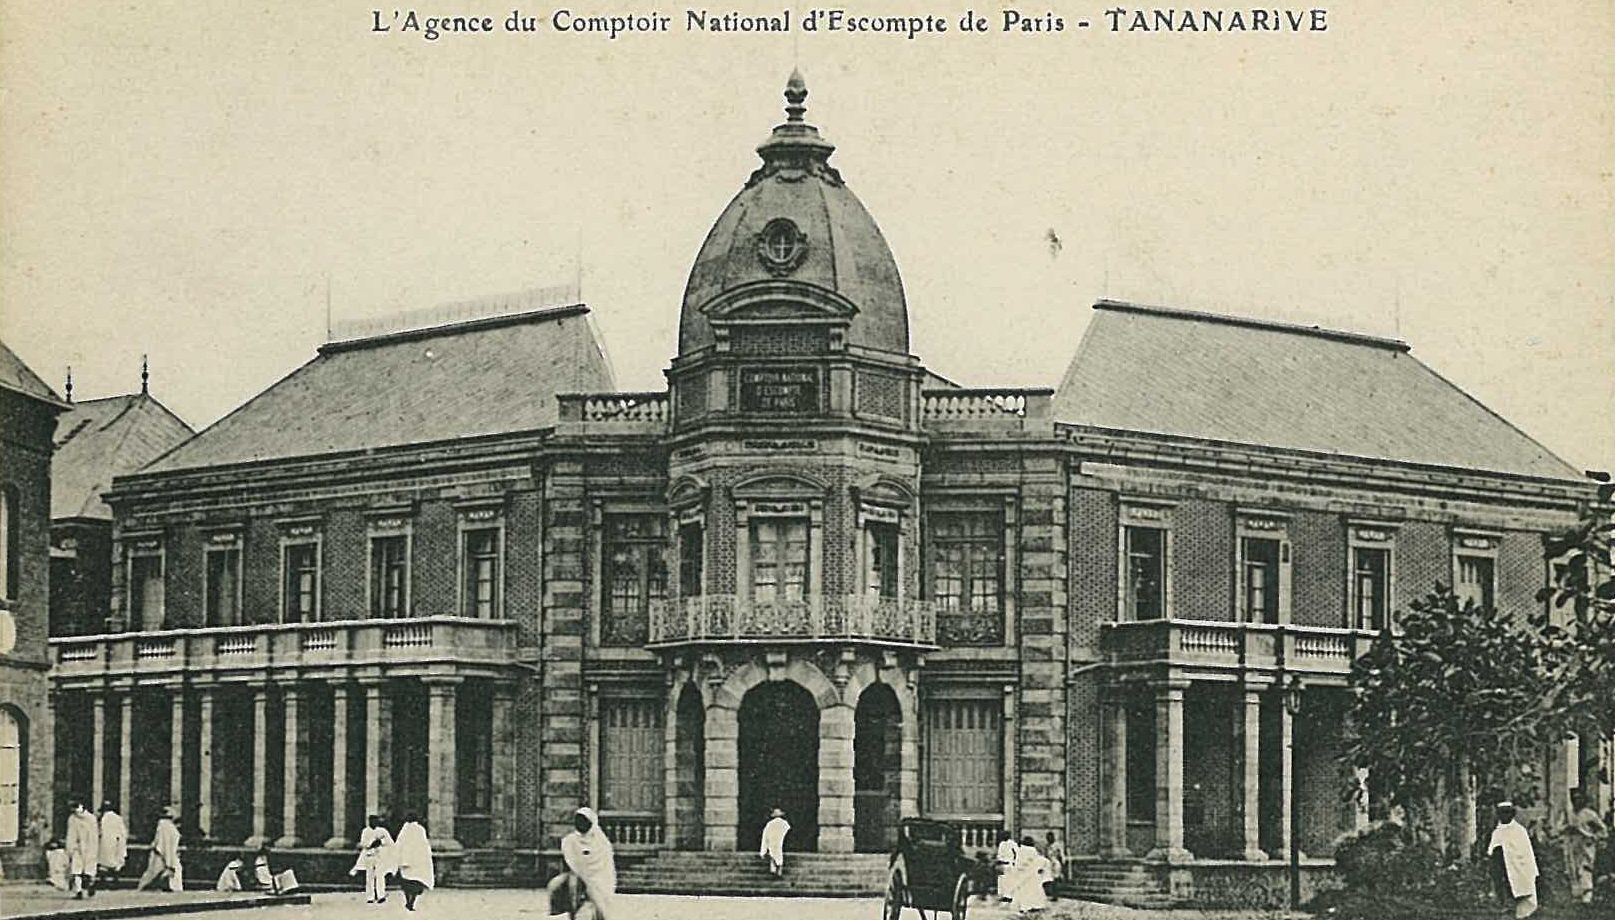 CNEP's branch at Tananarive (Madagascar) in the nineties - BNP Paribas Historical Collections